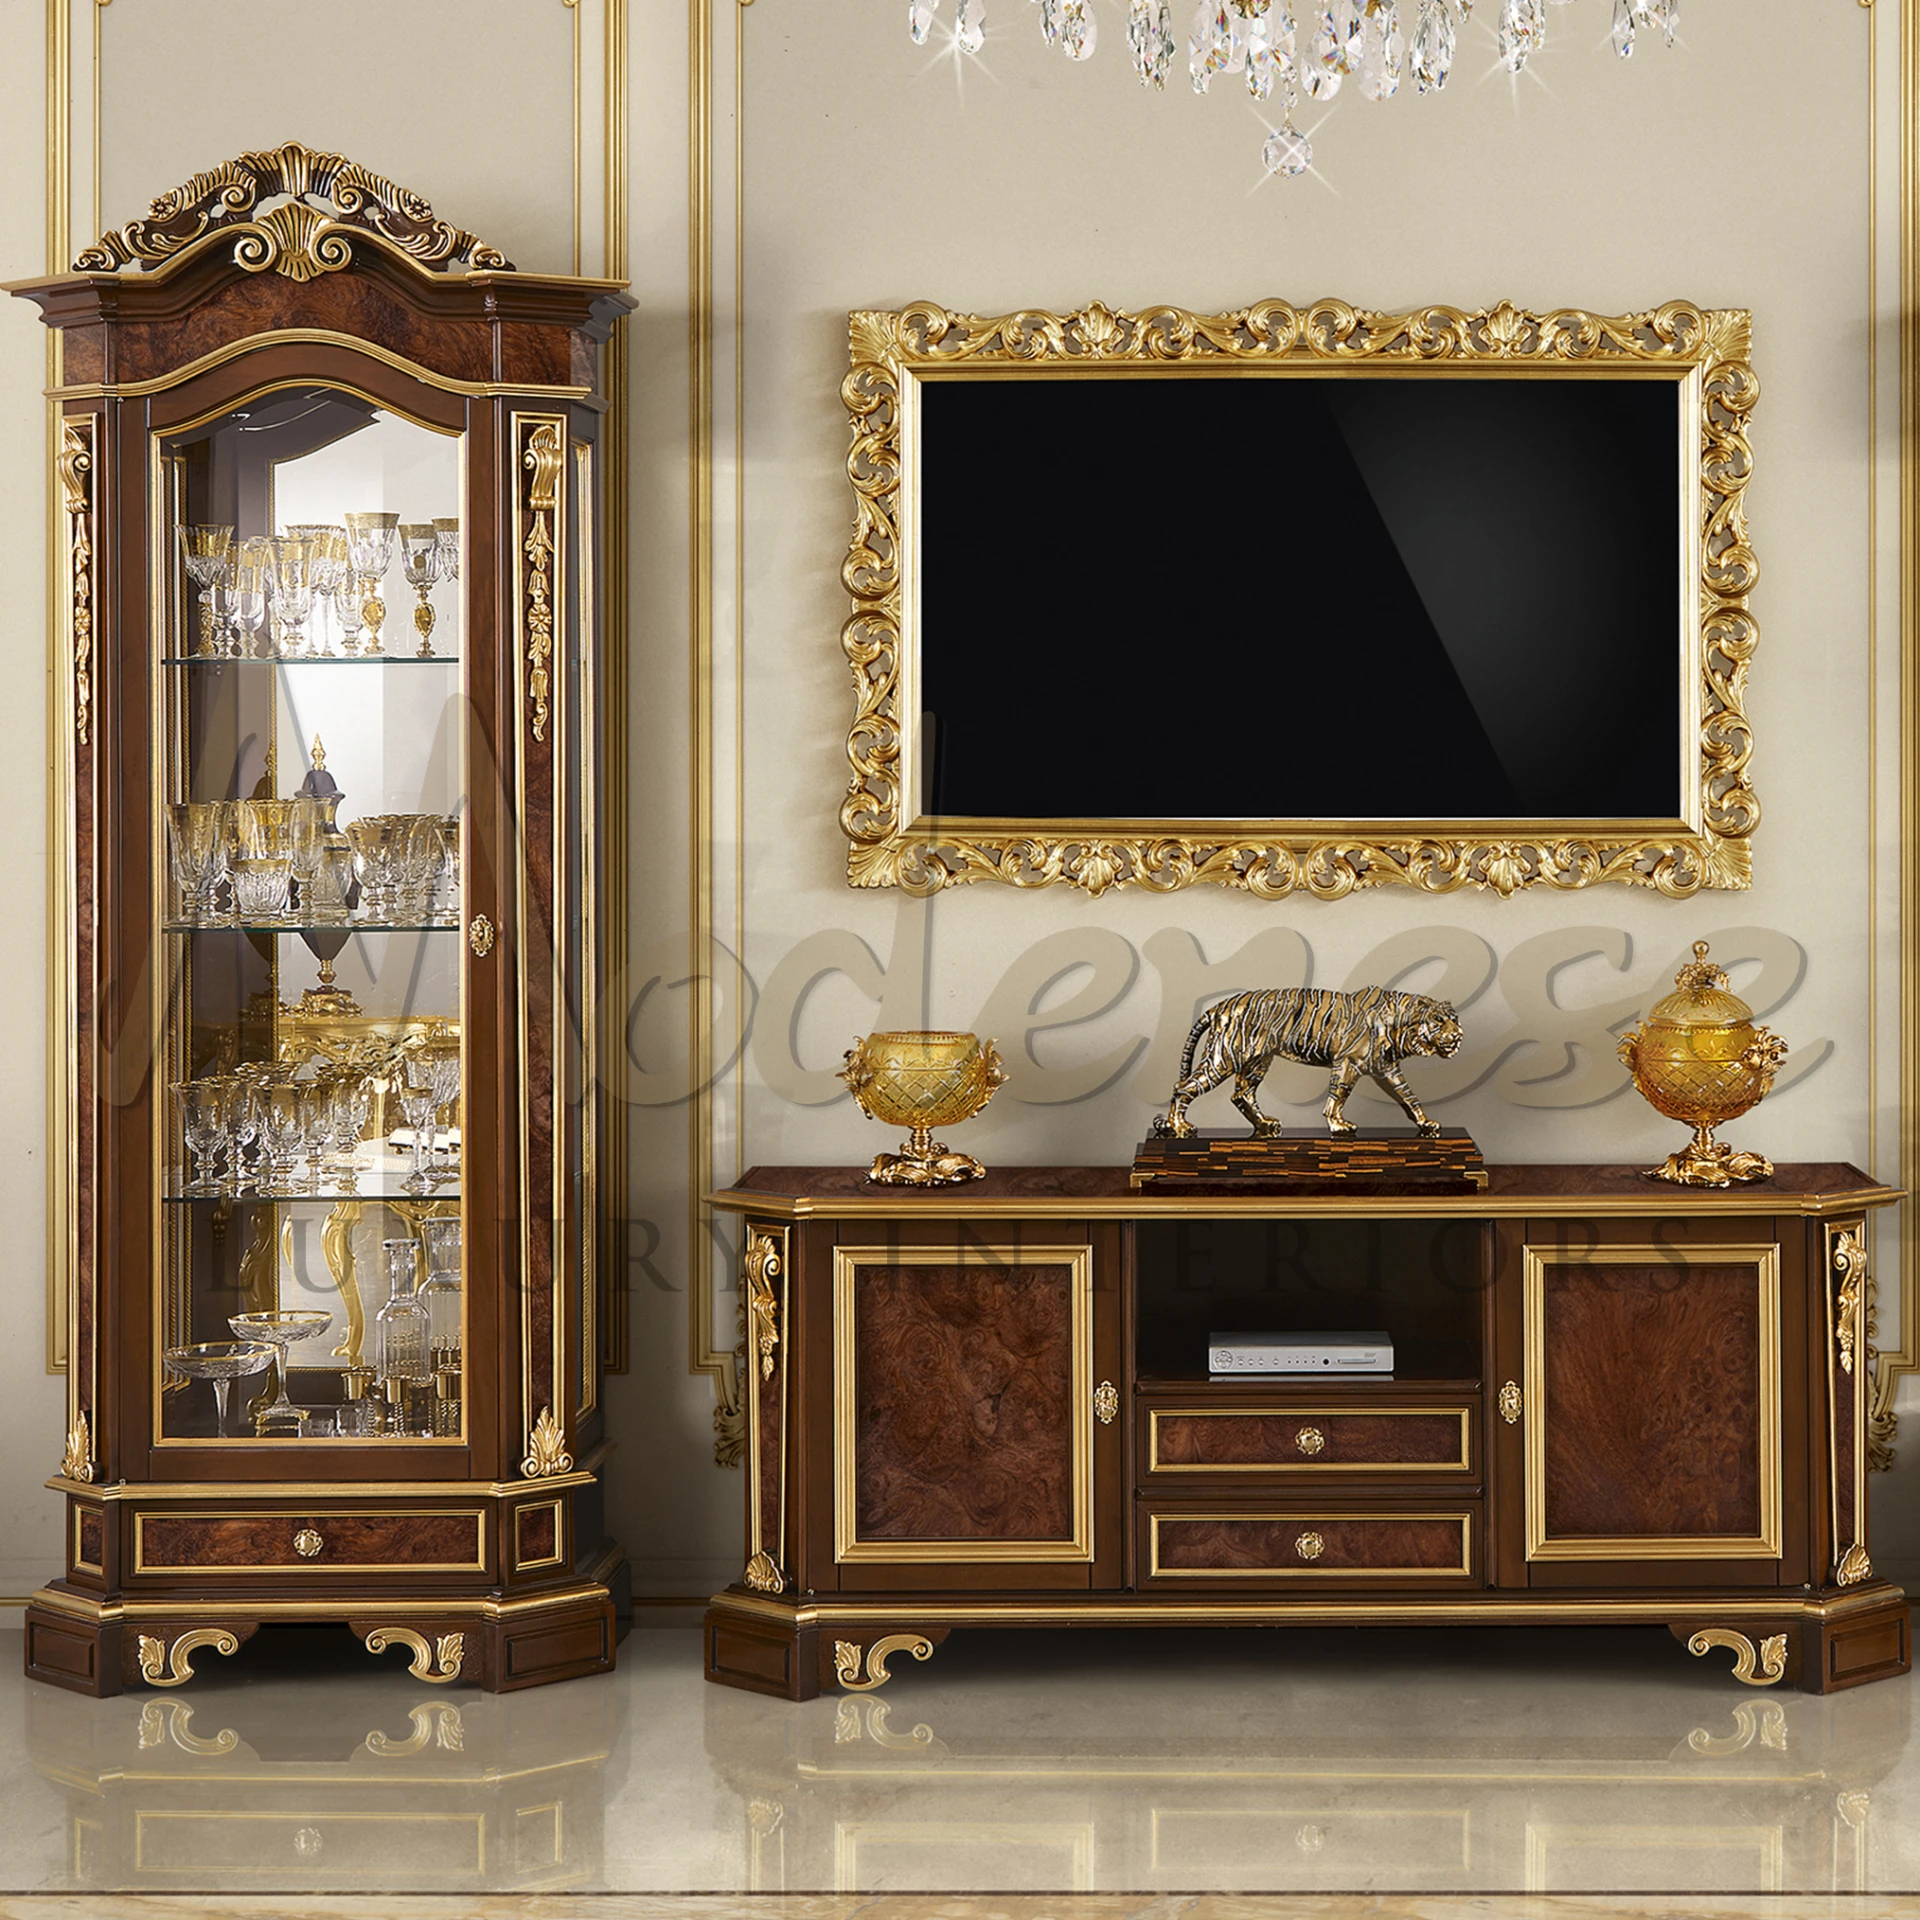 Italian design Dark Brown TV Stand, combining classic interior design with luxury gold leaf for a unique, romantic touch.